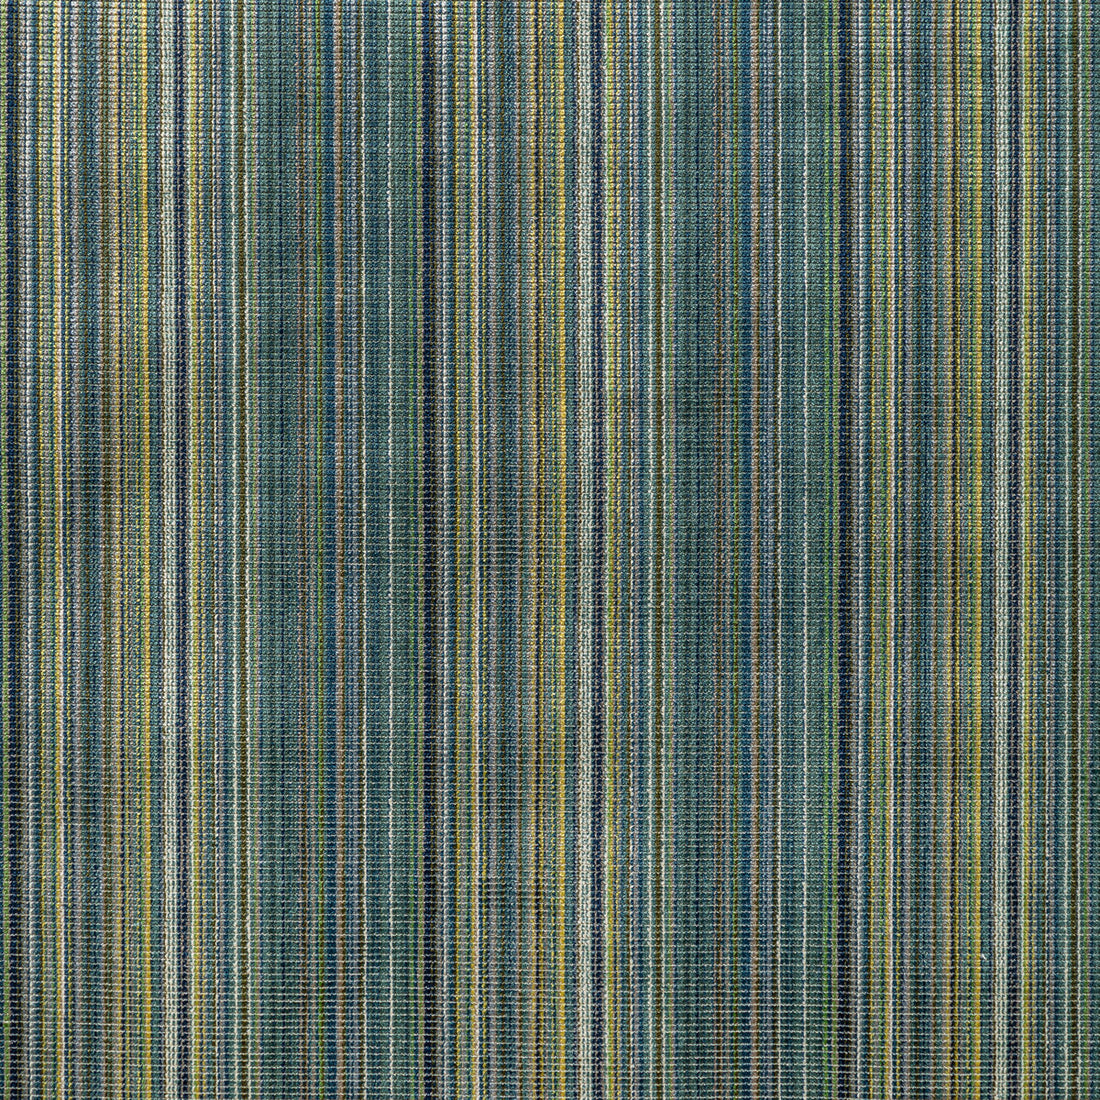 Stria Velvet fabric in emerald color - pattern 36371.350.0 - by Kravet Couture in the Corey Damen Jenkins Trad Nouveau collection